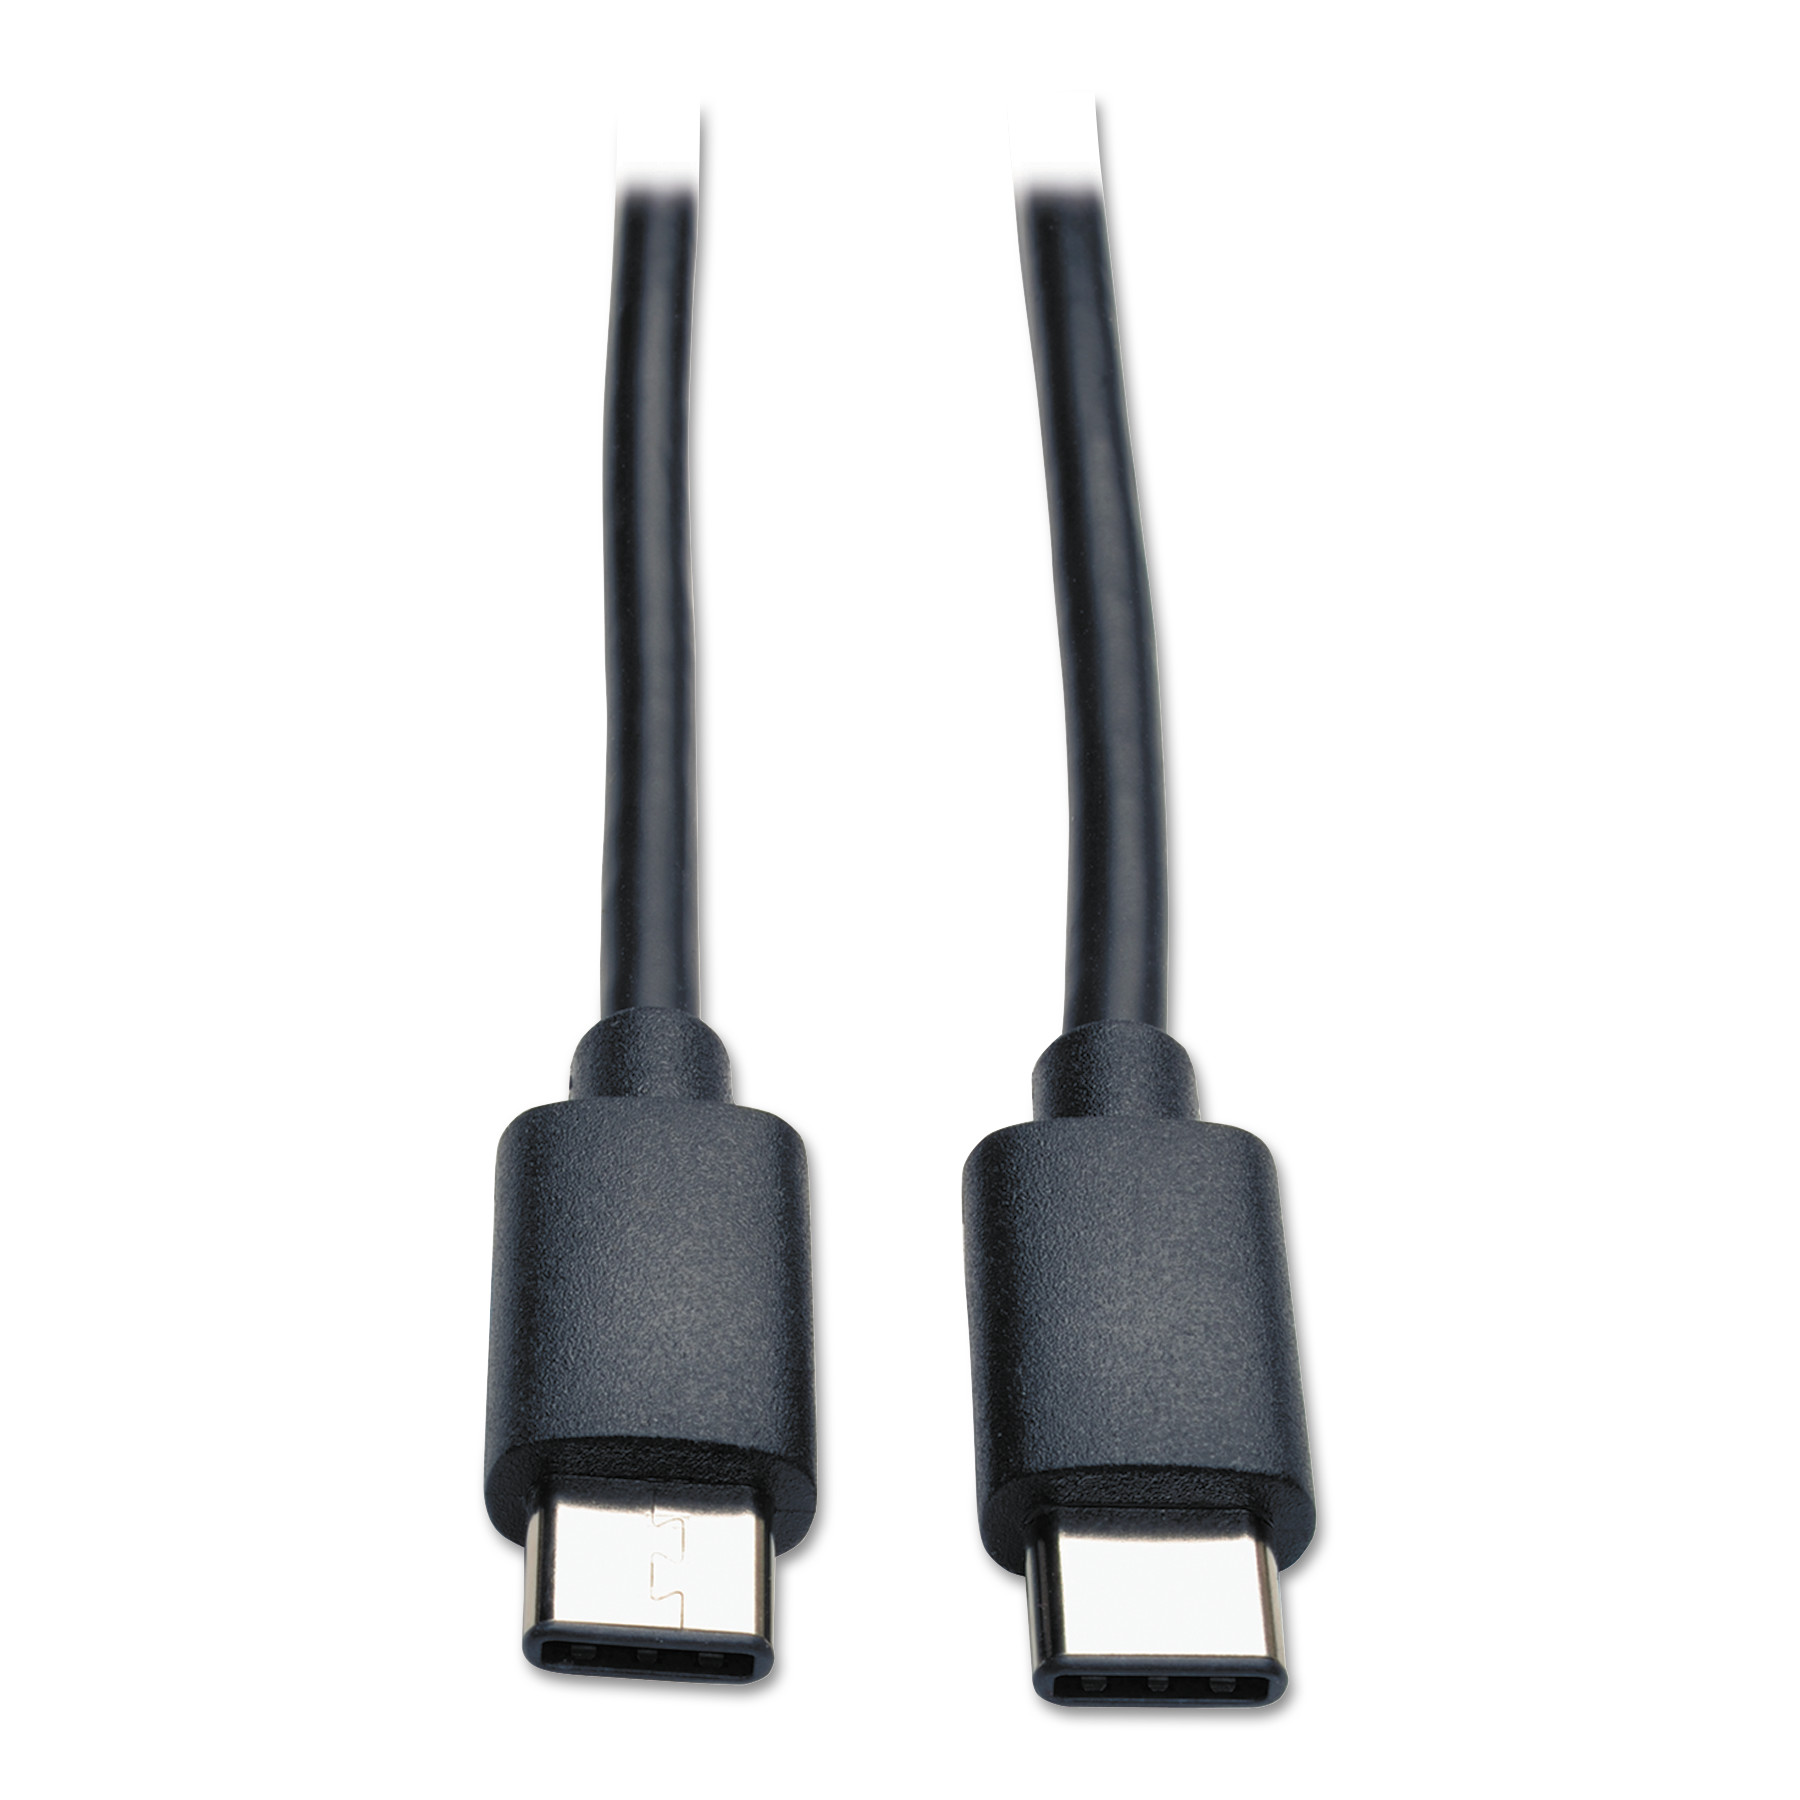 USB 2.0 Gold Cable, USB Type-C Male, 6 ft, Black